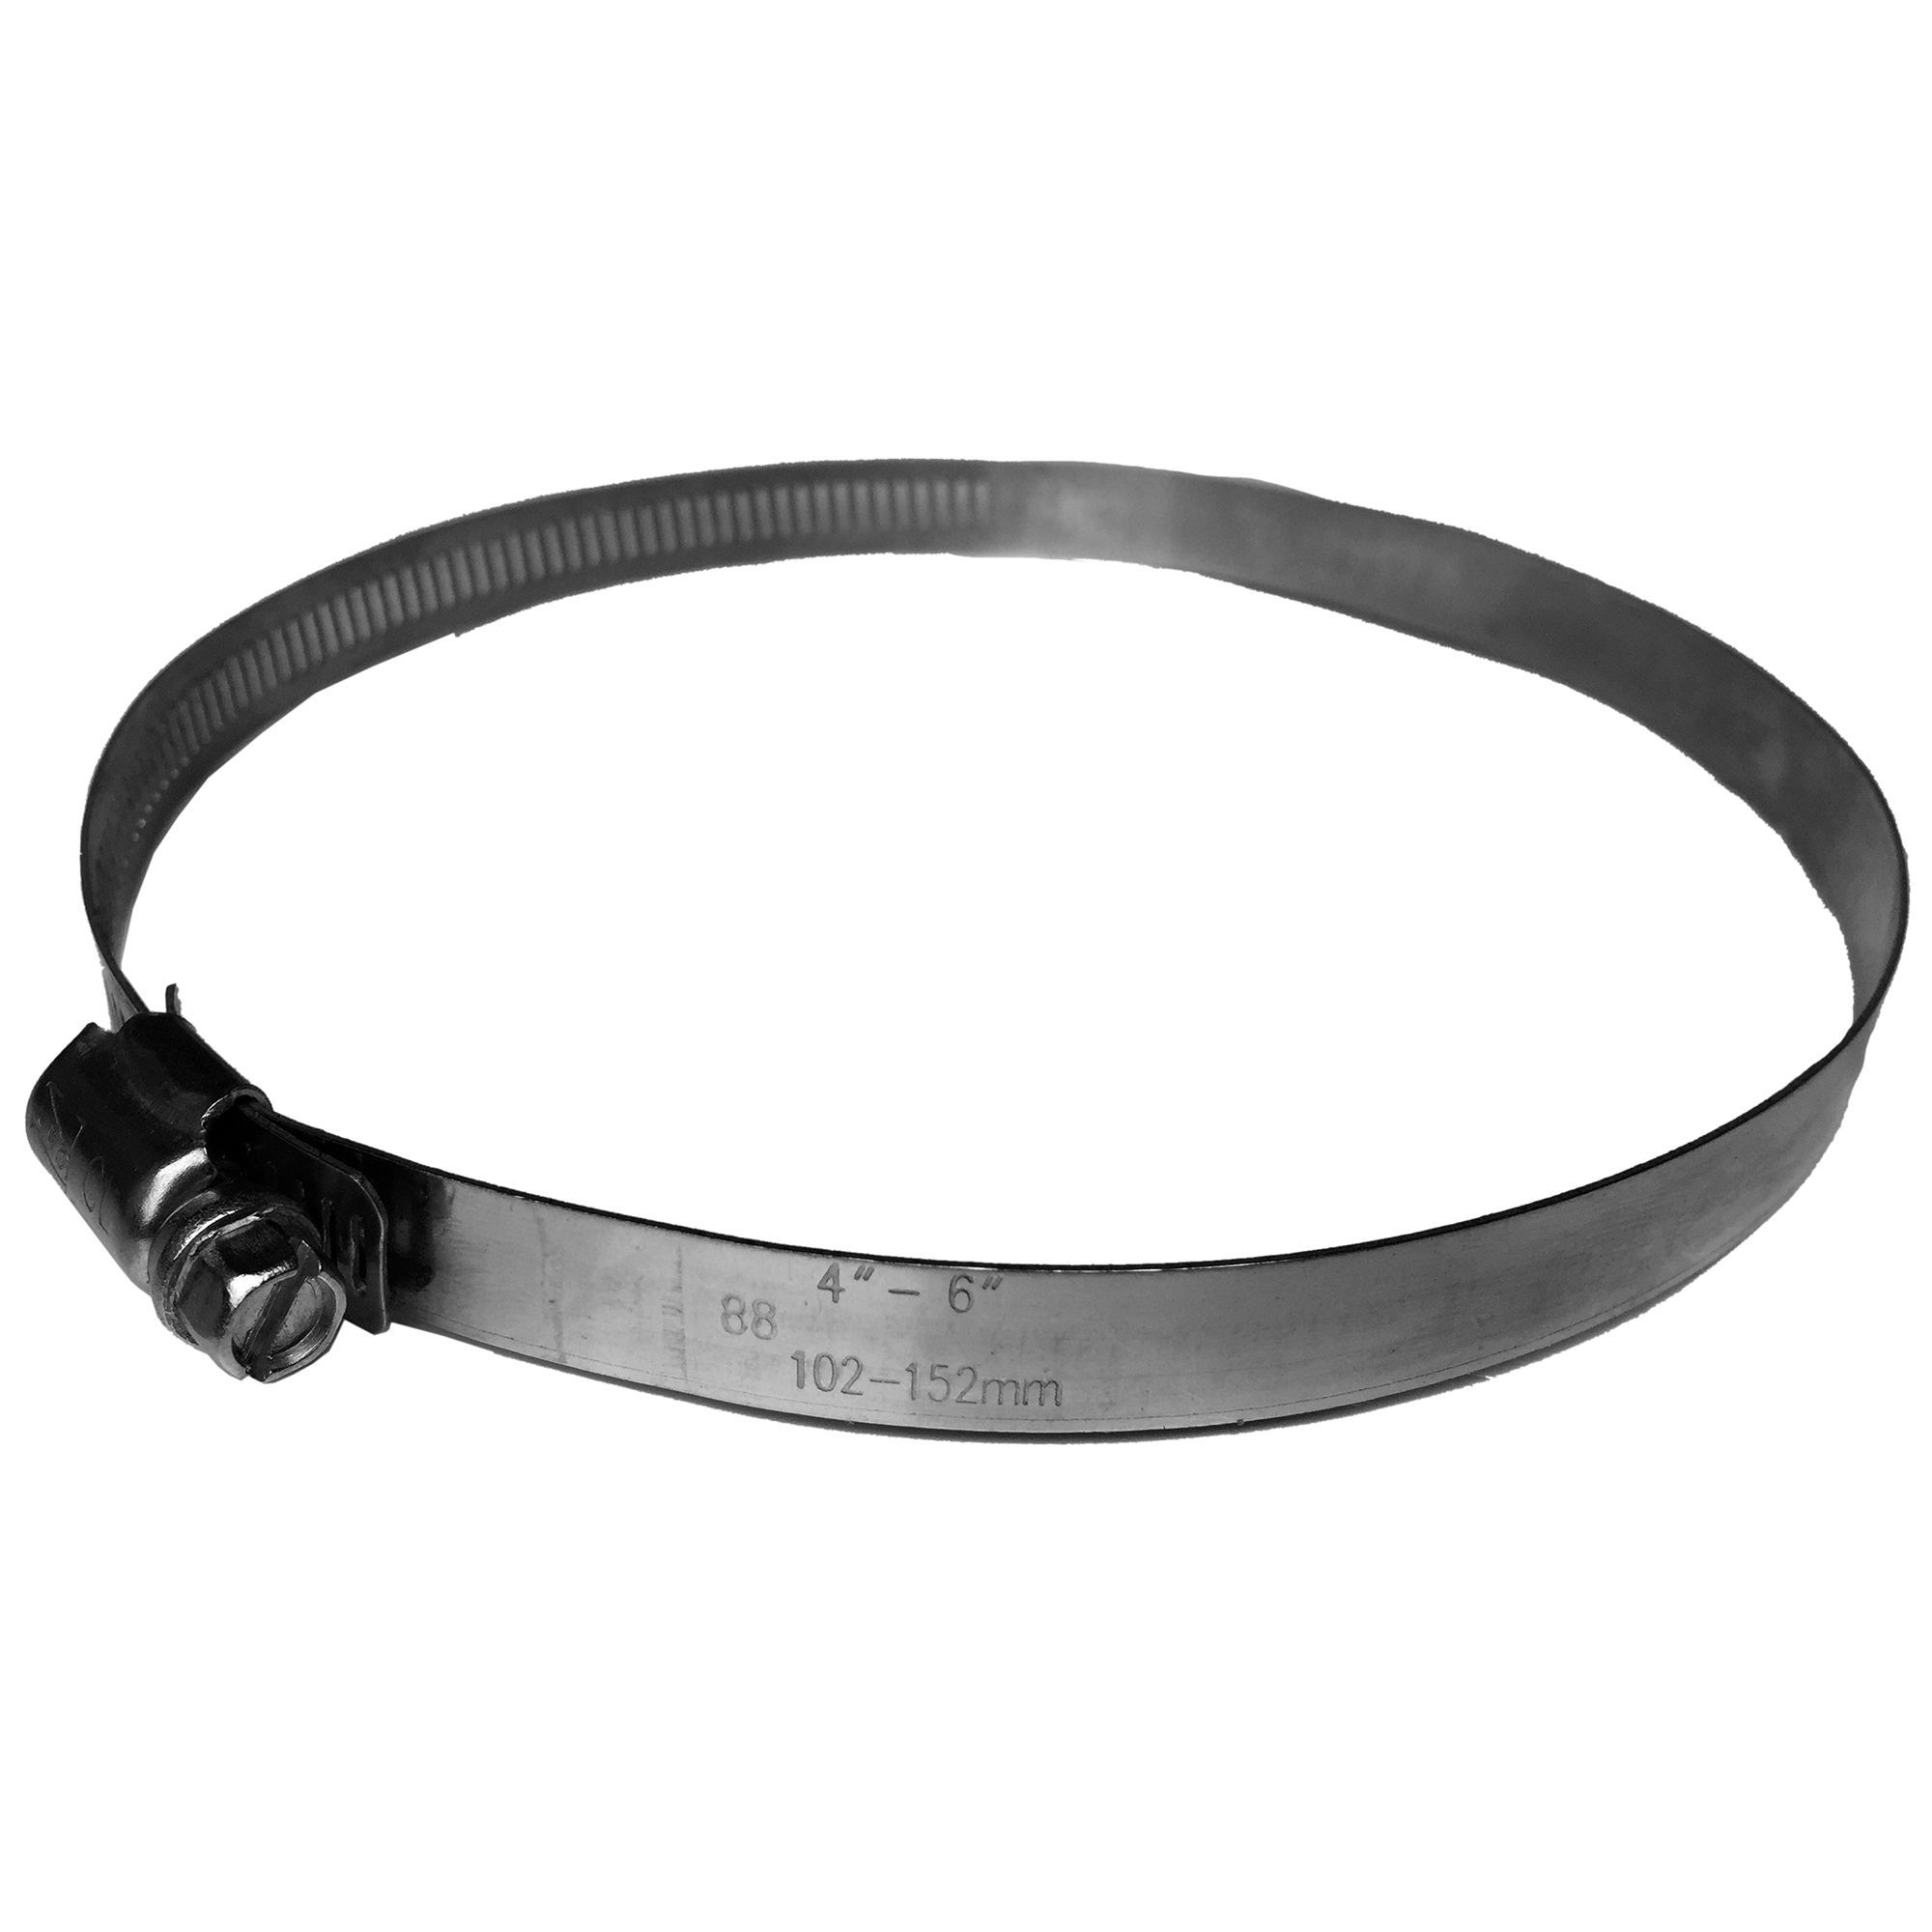 Stainless steel hose clamp with screw